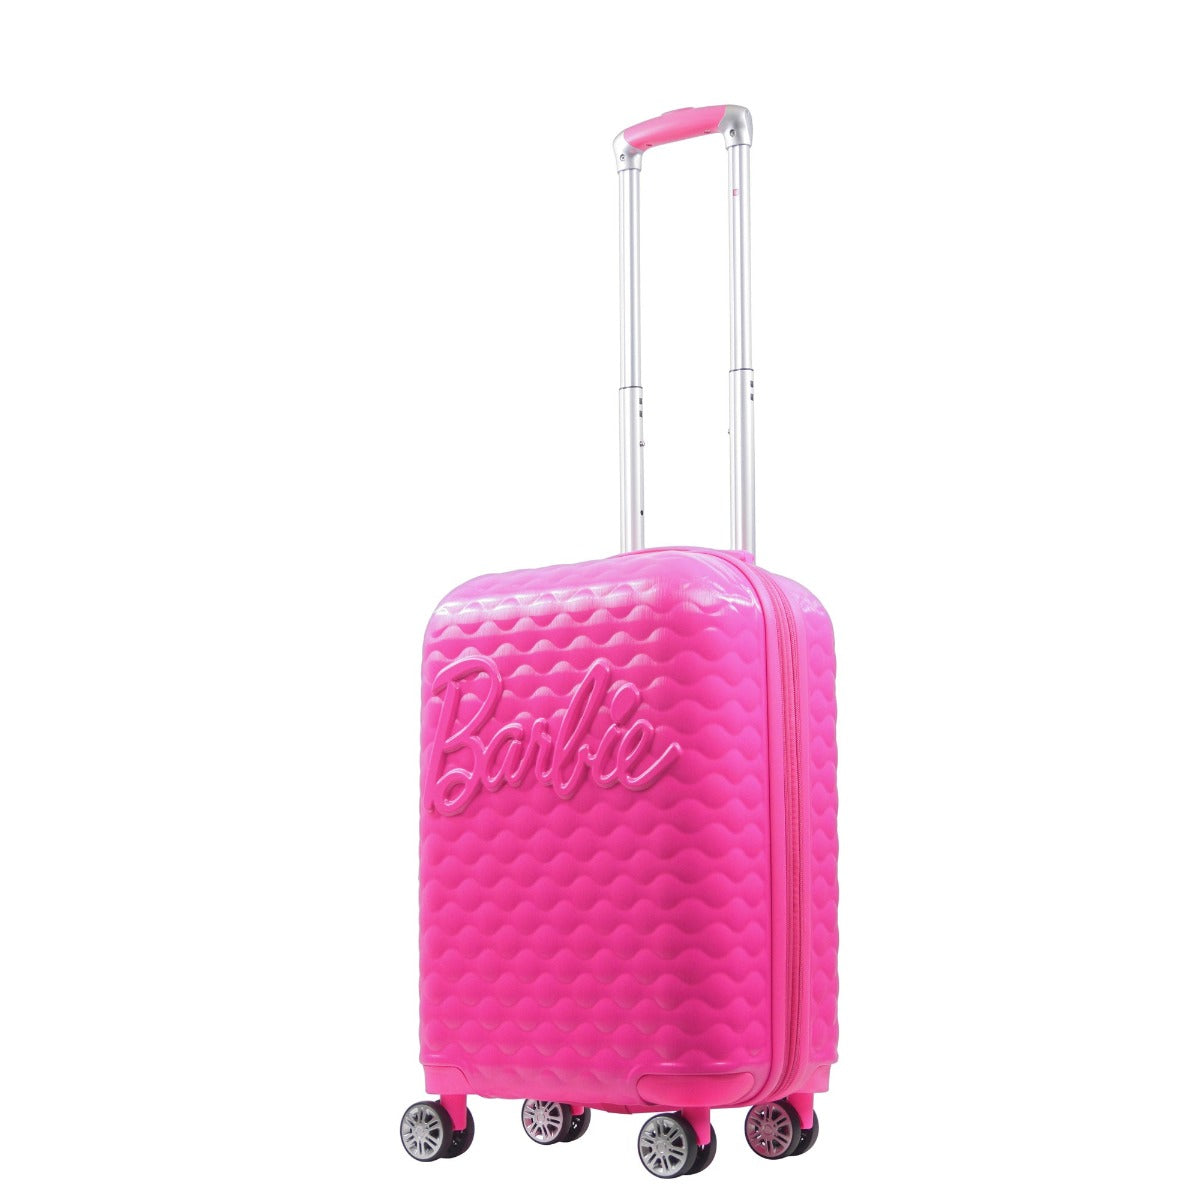 Hot pink Barbie quilted texture 22.5" carry-on luggage suitcase